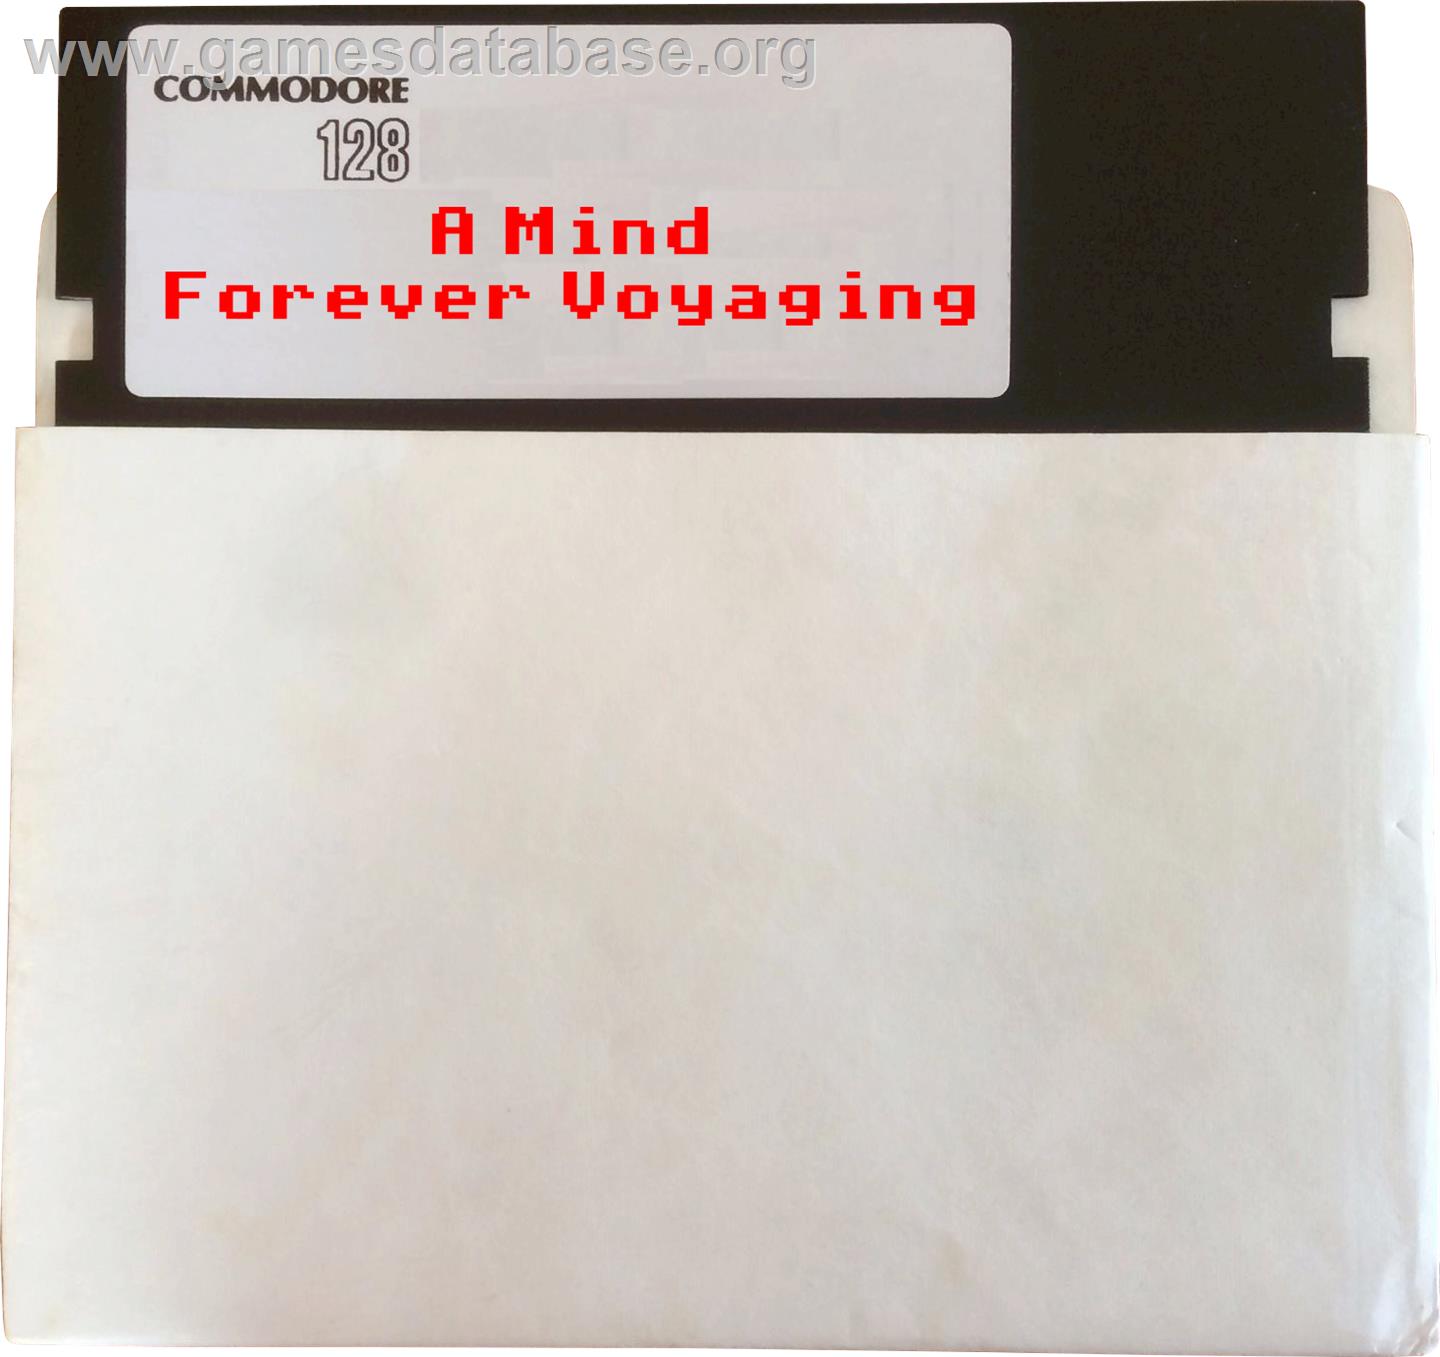 A Mind Forever Voyaging - Commodore 128 - Artwork - Disc